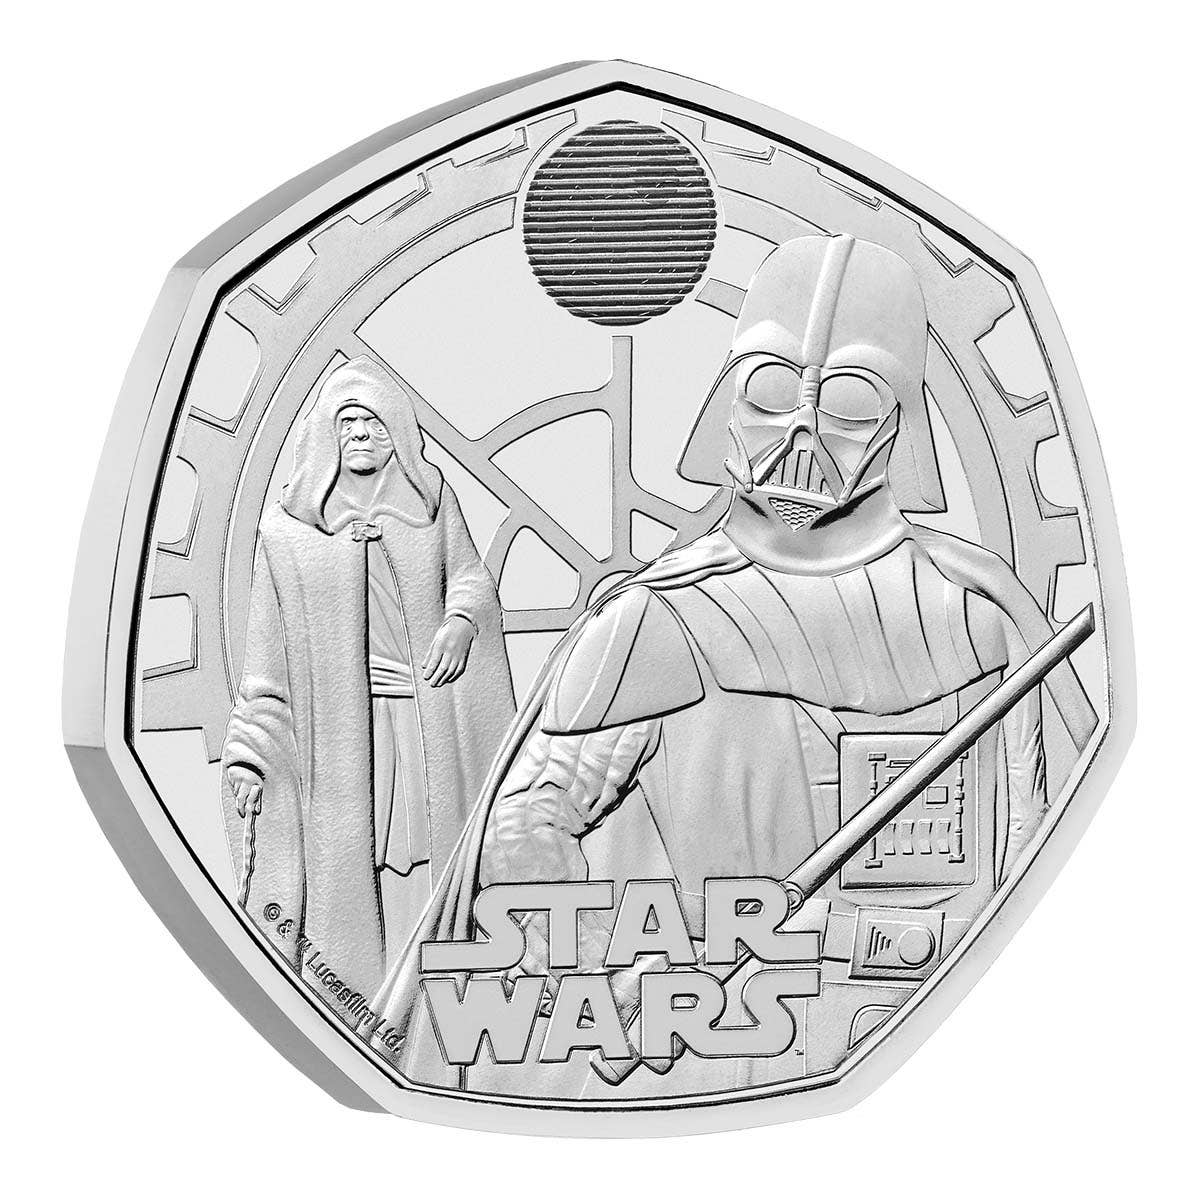 Star Wars Darth Vader and Emperor Palpatine 2023 50p Brilliant Uncirculated Coin